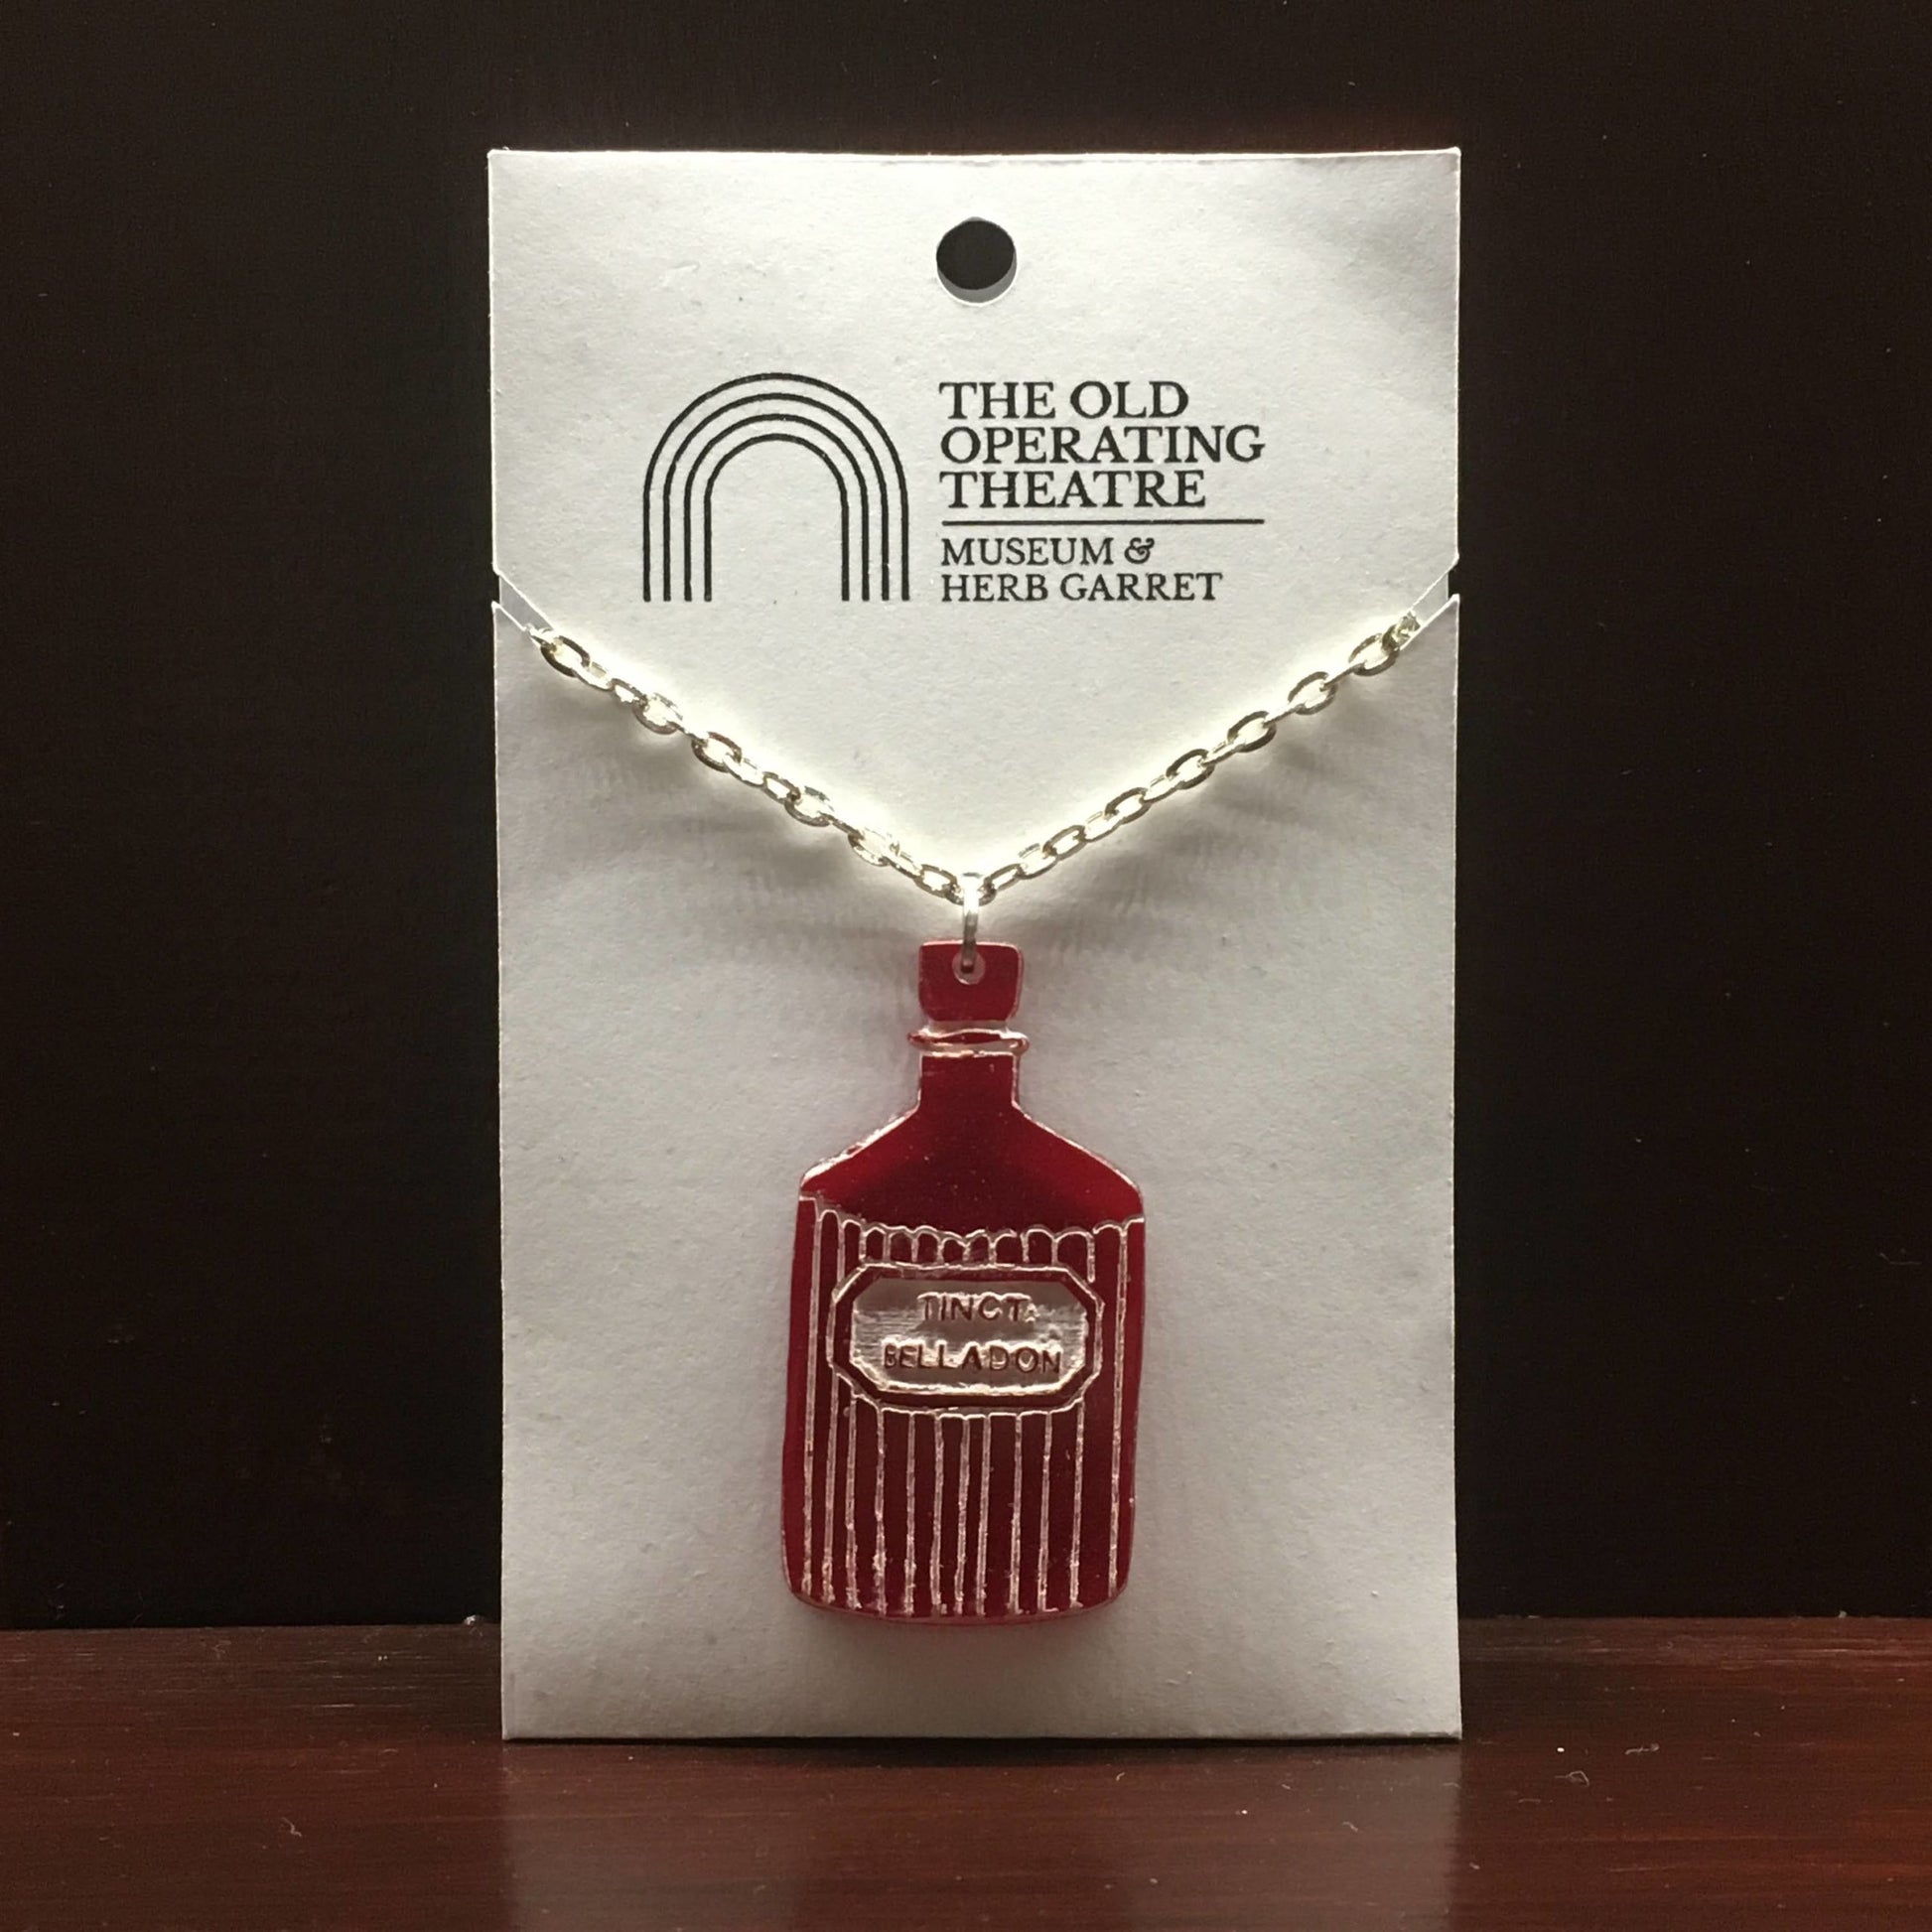 Red pendant in the shape of a bottle with the label 'tinct. belladon'